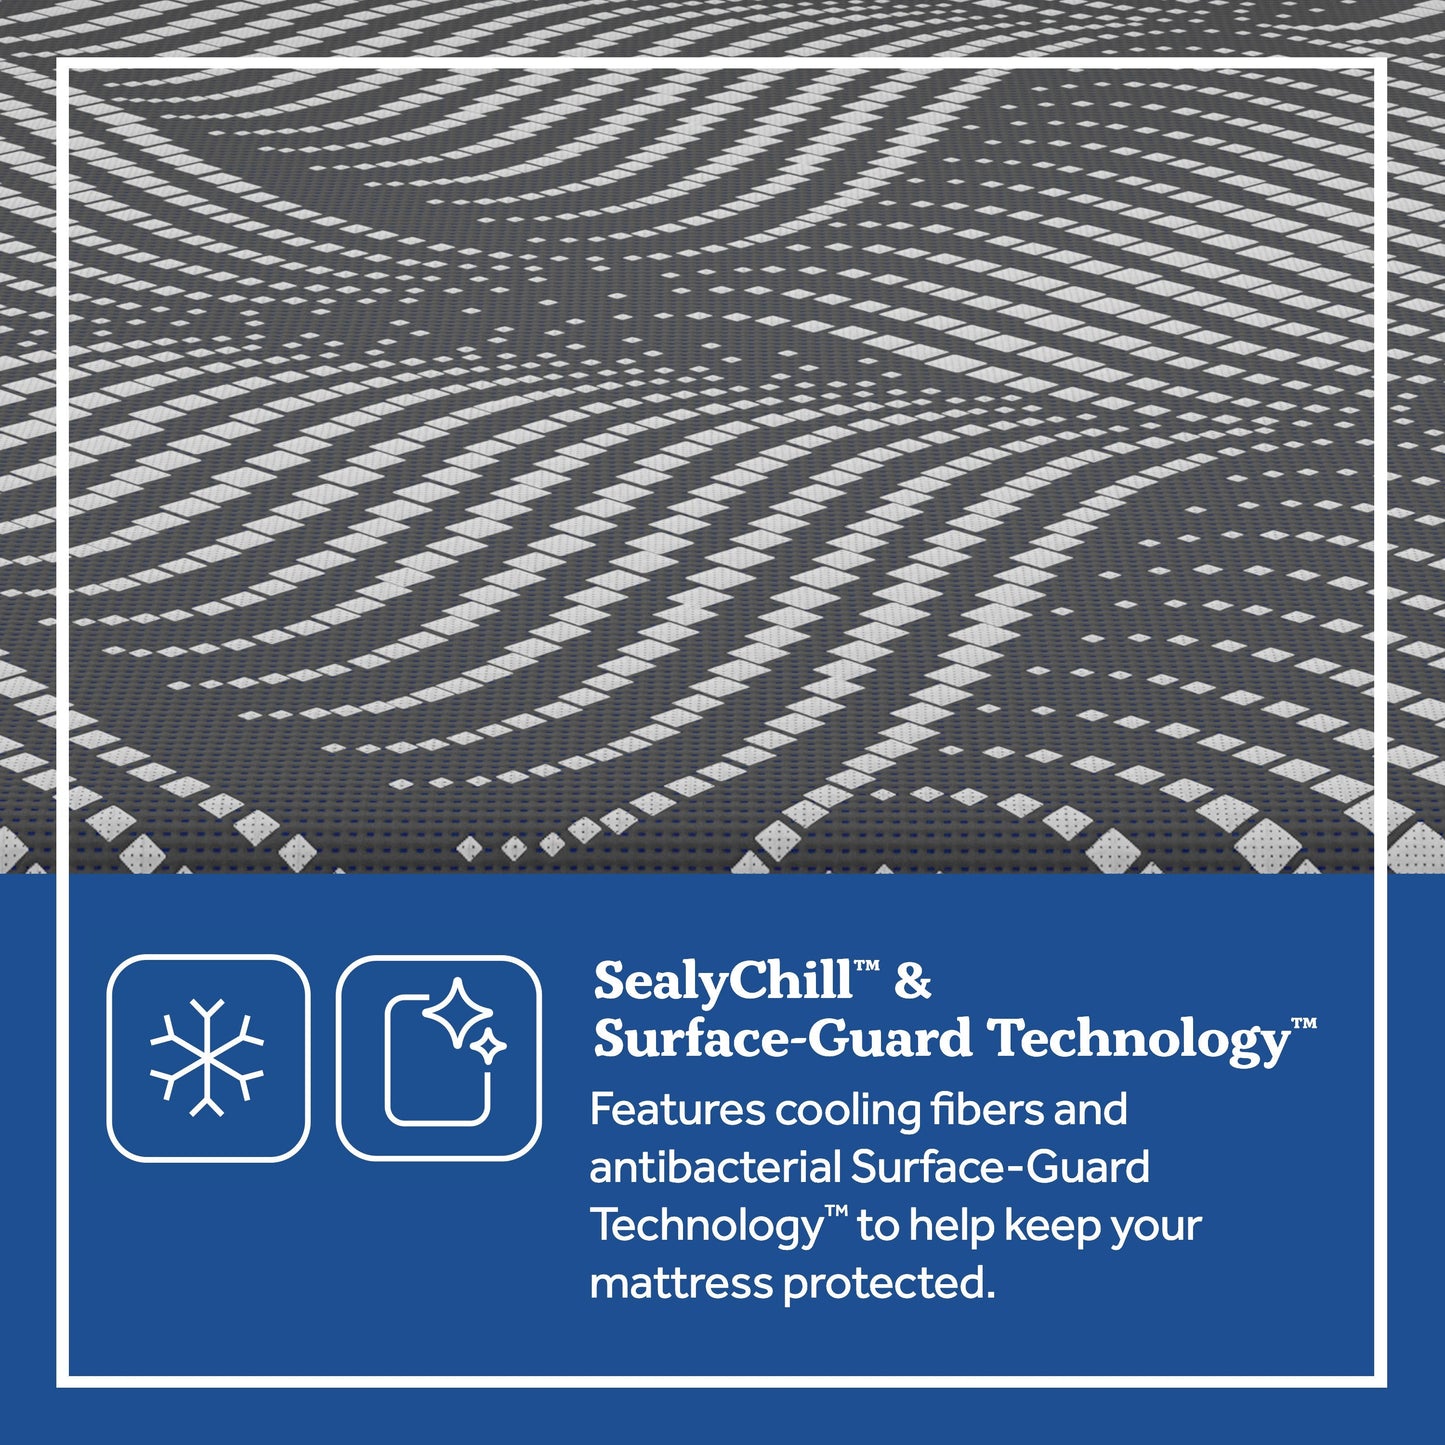 Sealy High Point Soft Hybrid Mattress SealyChill and Surface-Guard Technology badges